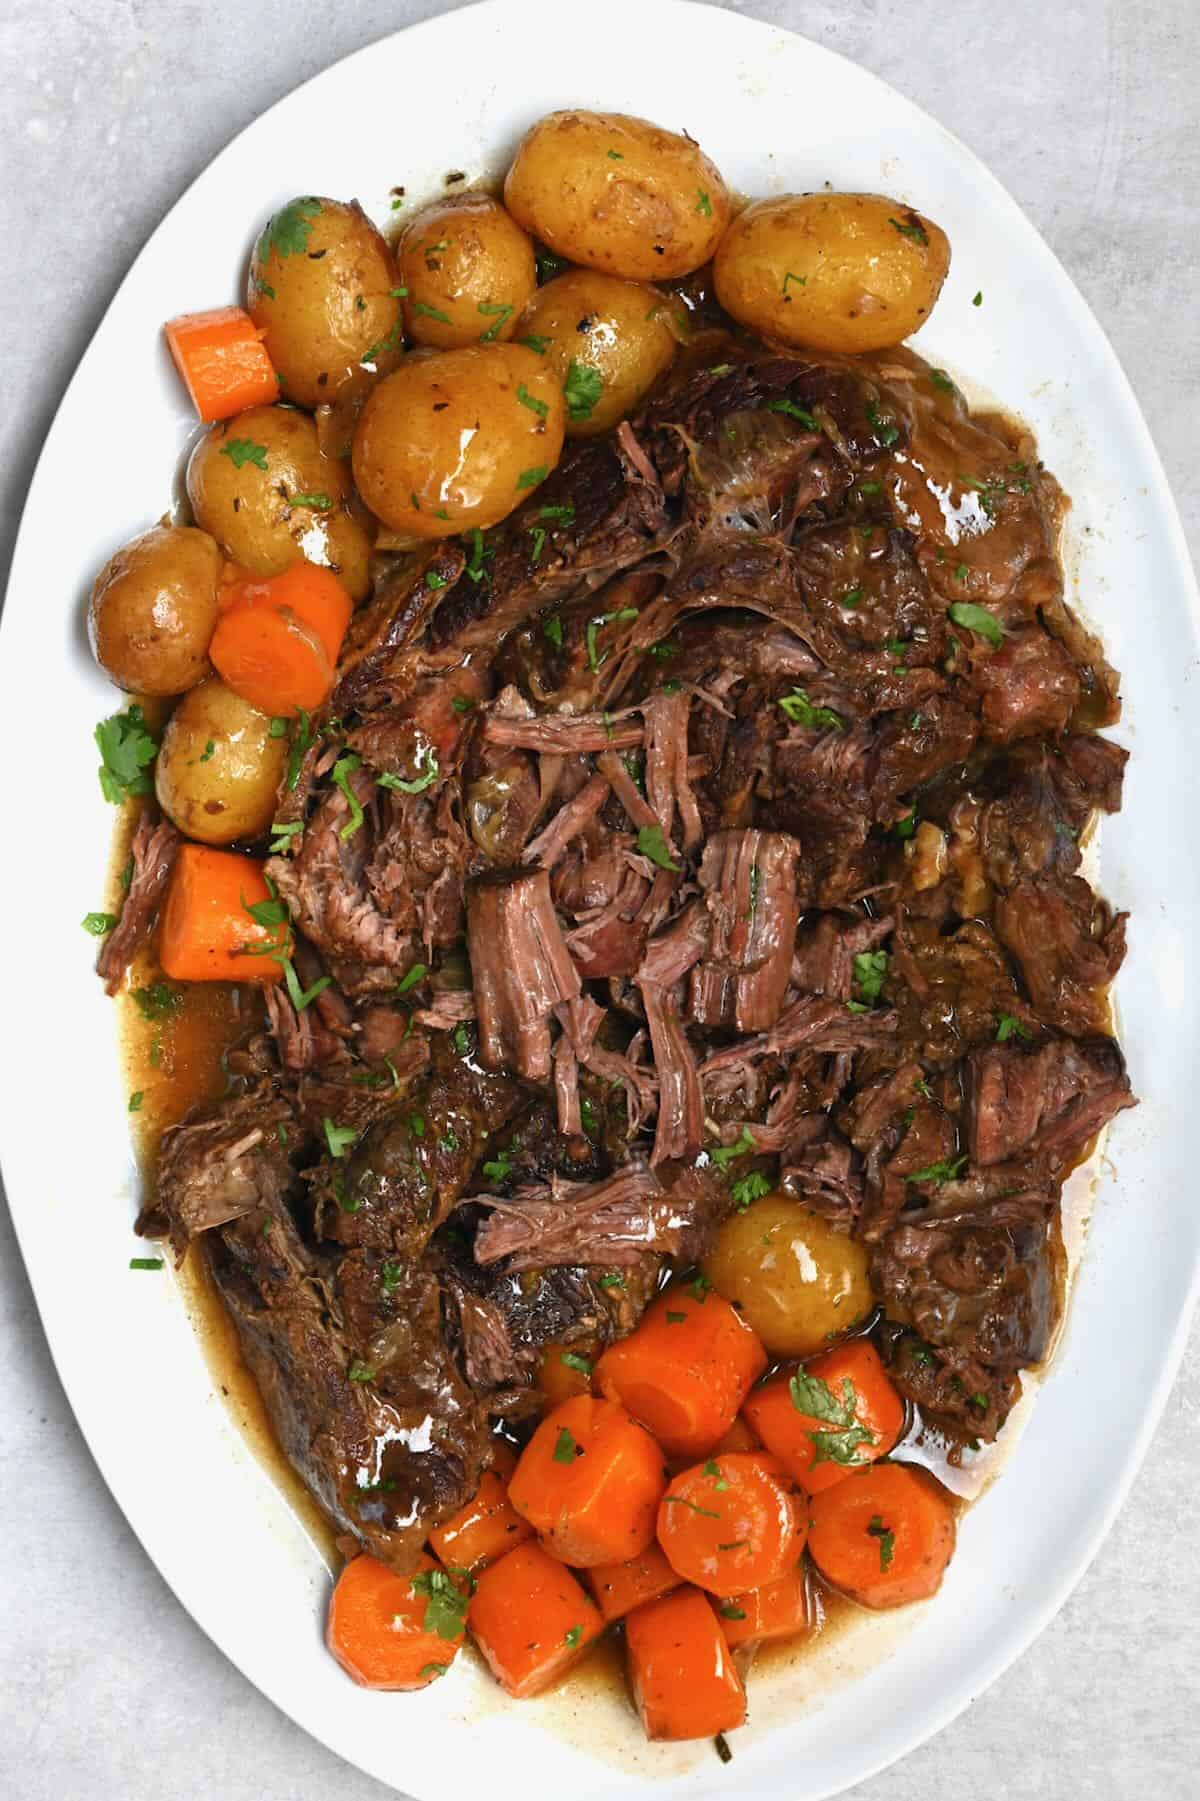 Crock pot roast dinner on a white plate with carrots and potatoes